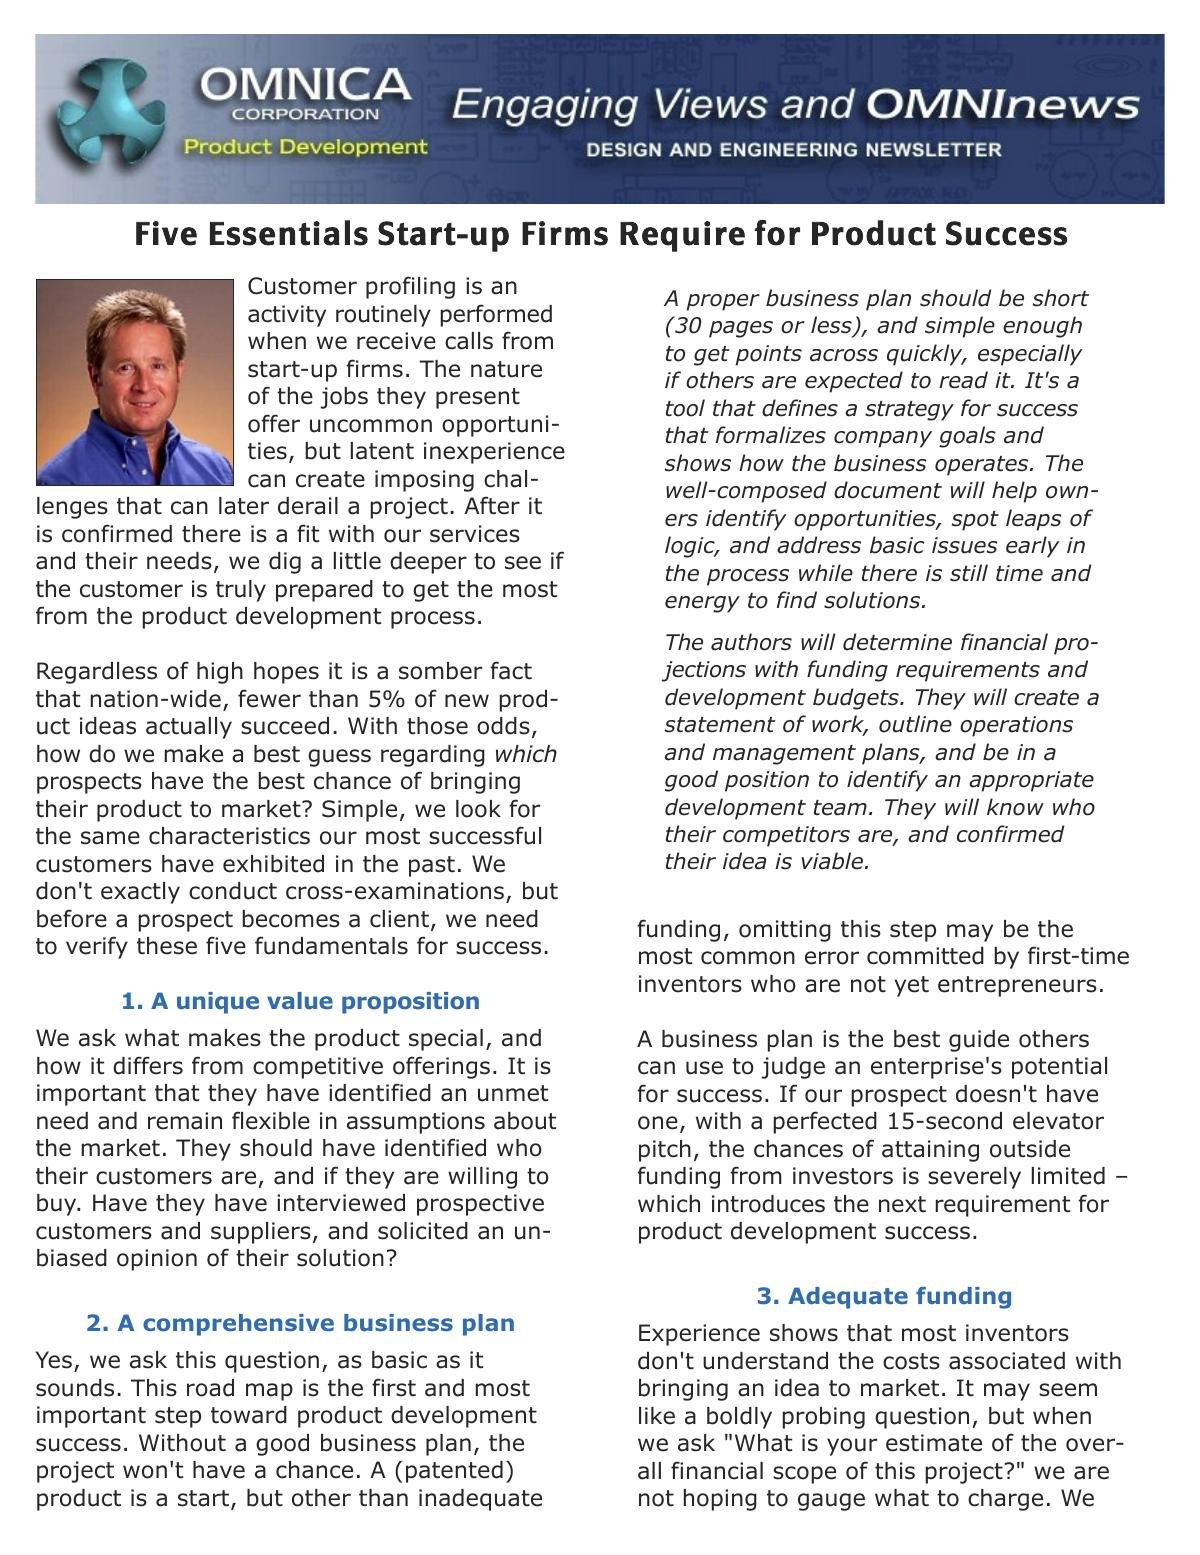 Five Essentials Start-up Firms Require for Product Success